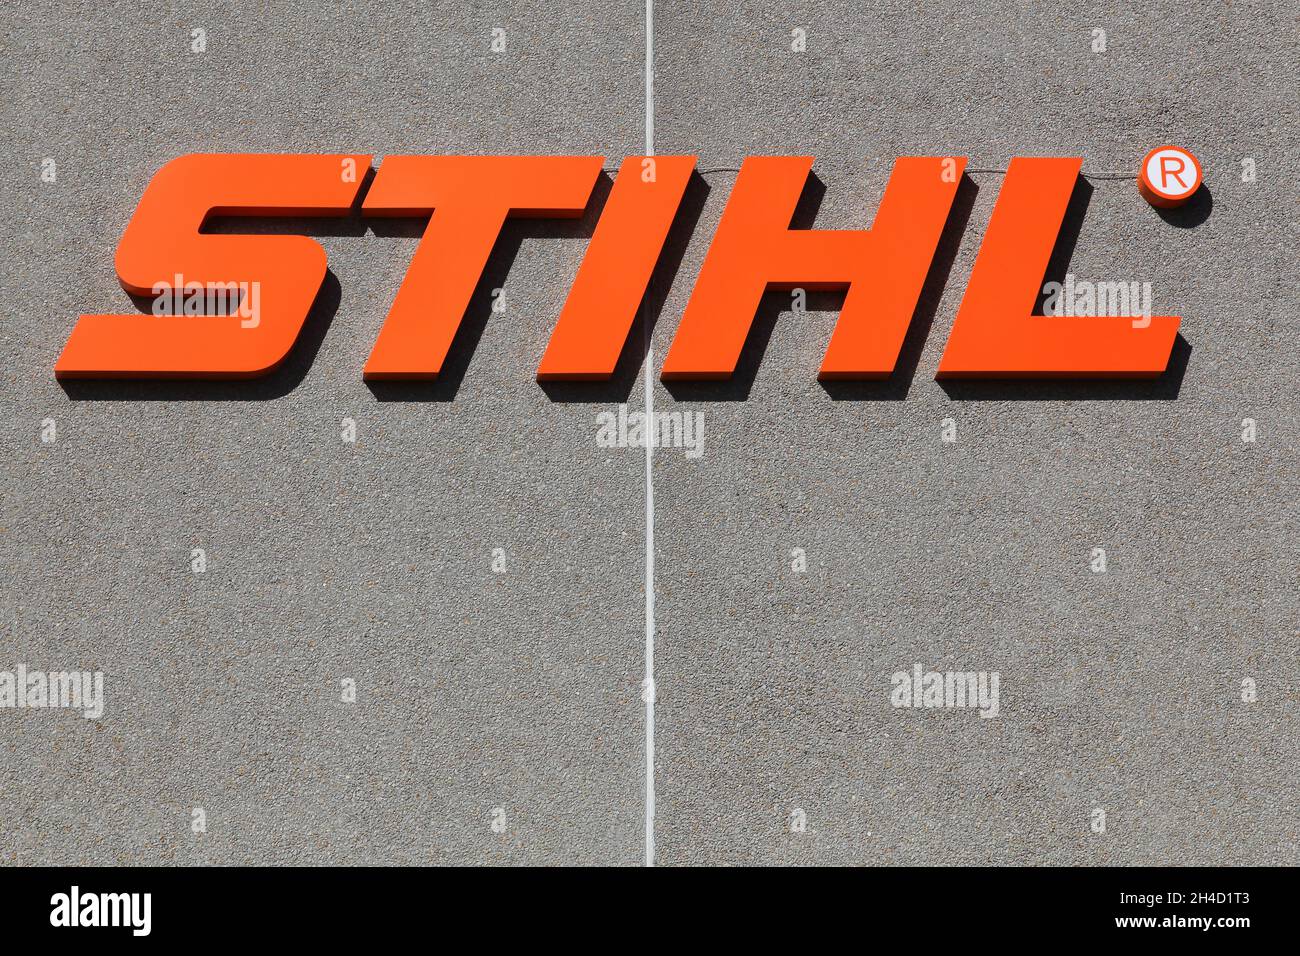 Randers, Denmark - May 5, 2018: Stihl logo on a wall. Stihl is a german manufacturer of chainsaws and other handheld power equipment Stock Photo